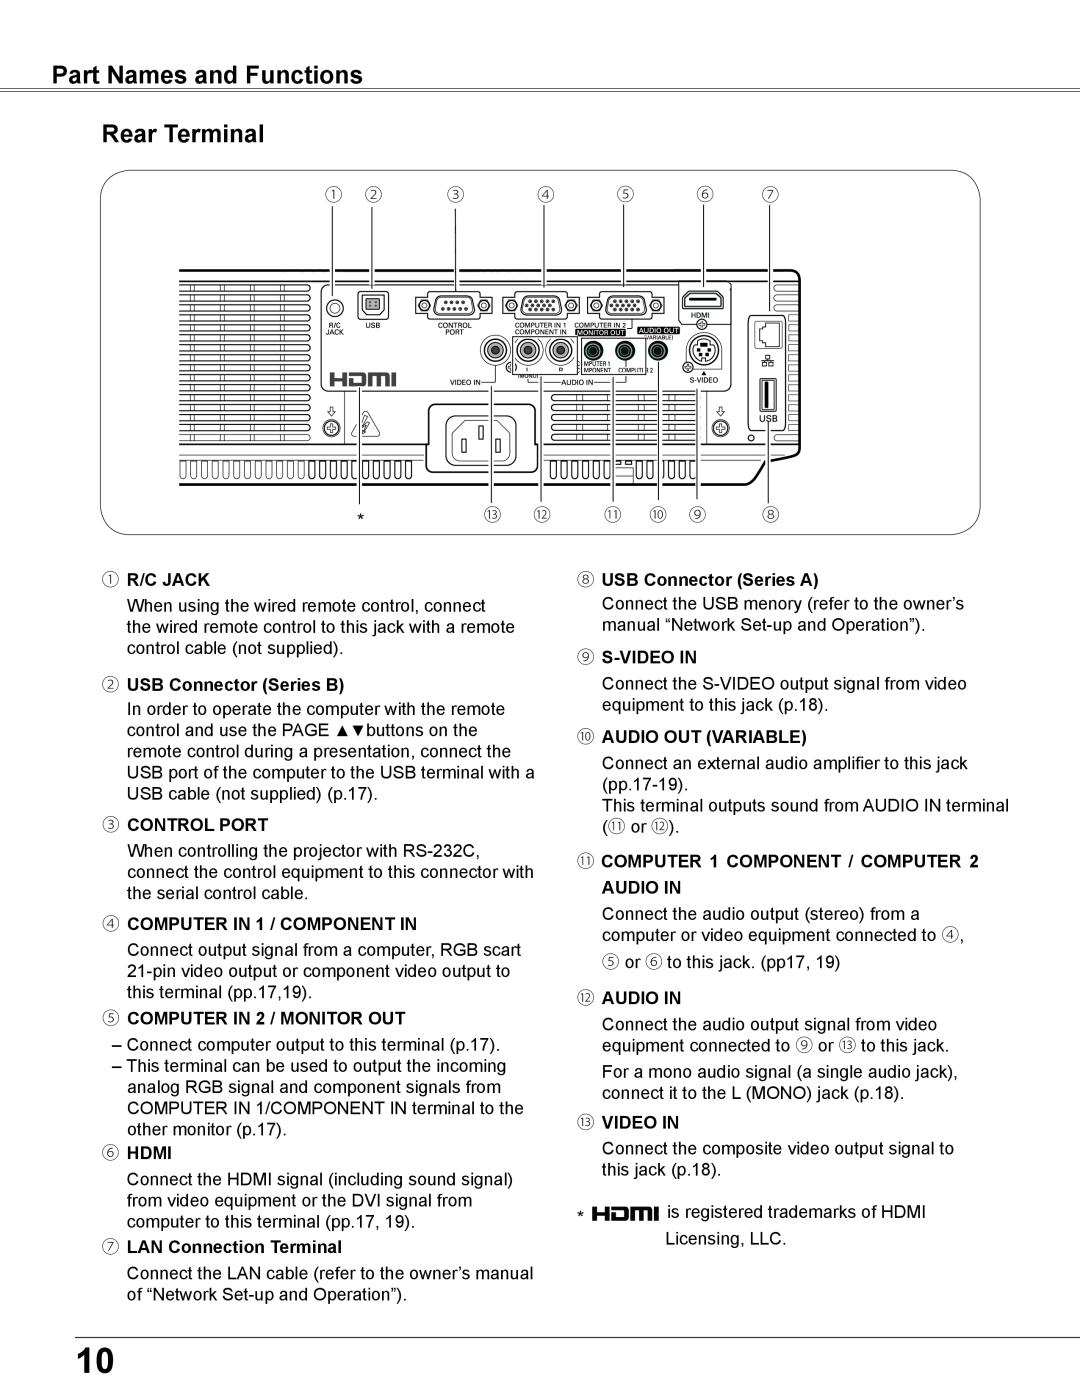 Sanyo WXU700A Part Names and Functions Rear Terminal, ①R/C JACK, ②USB Connector Series B, ③CONTROL PORT, ⑥HDMI, ⑨S-VIDEOIN 